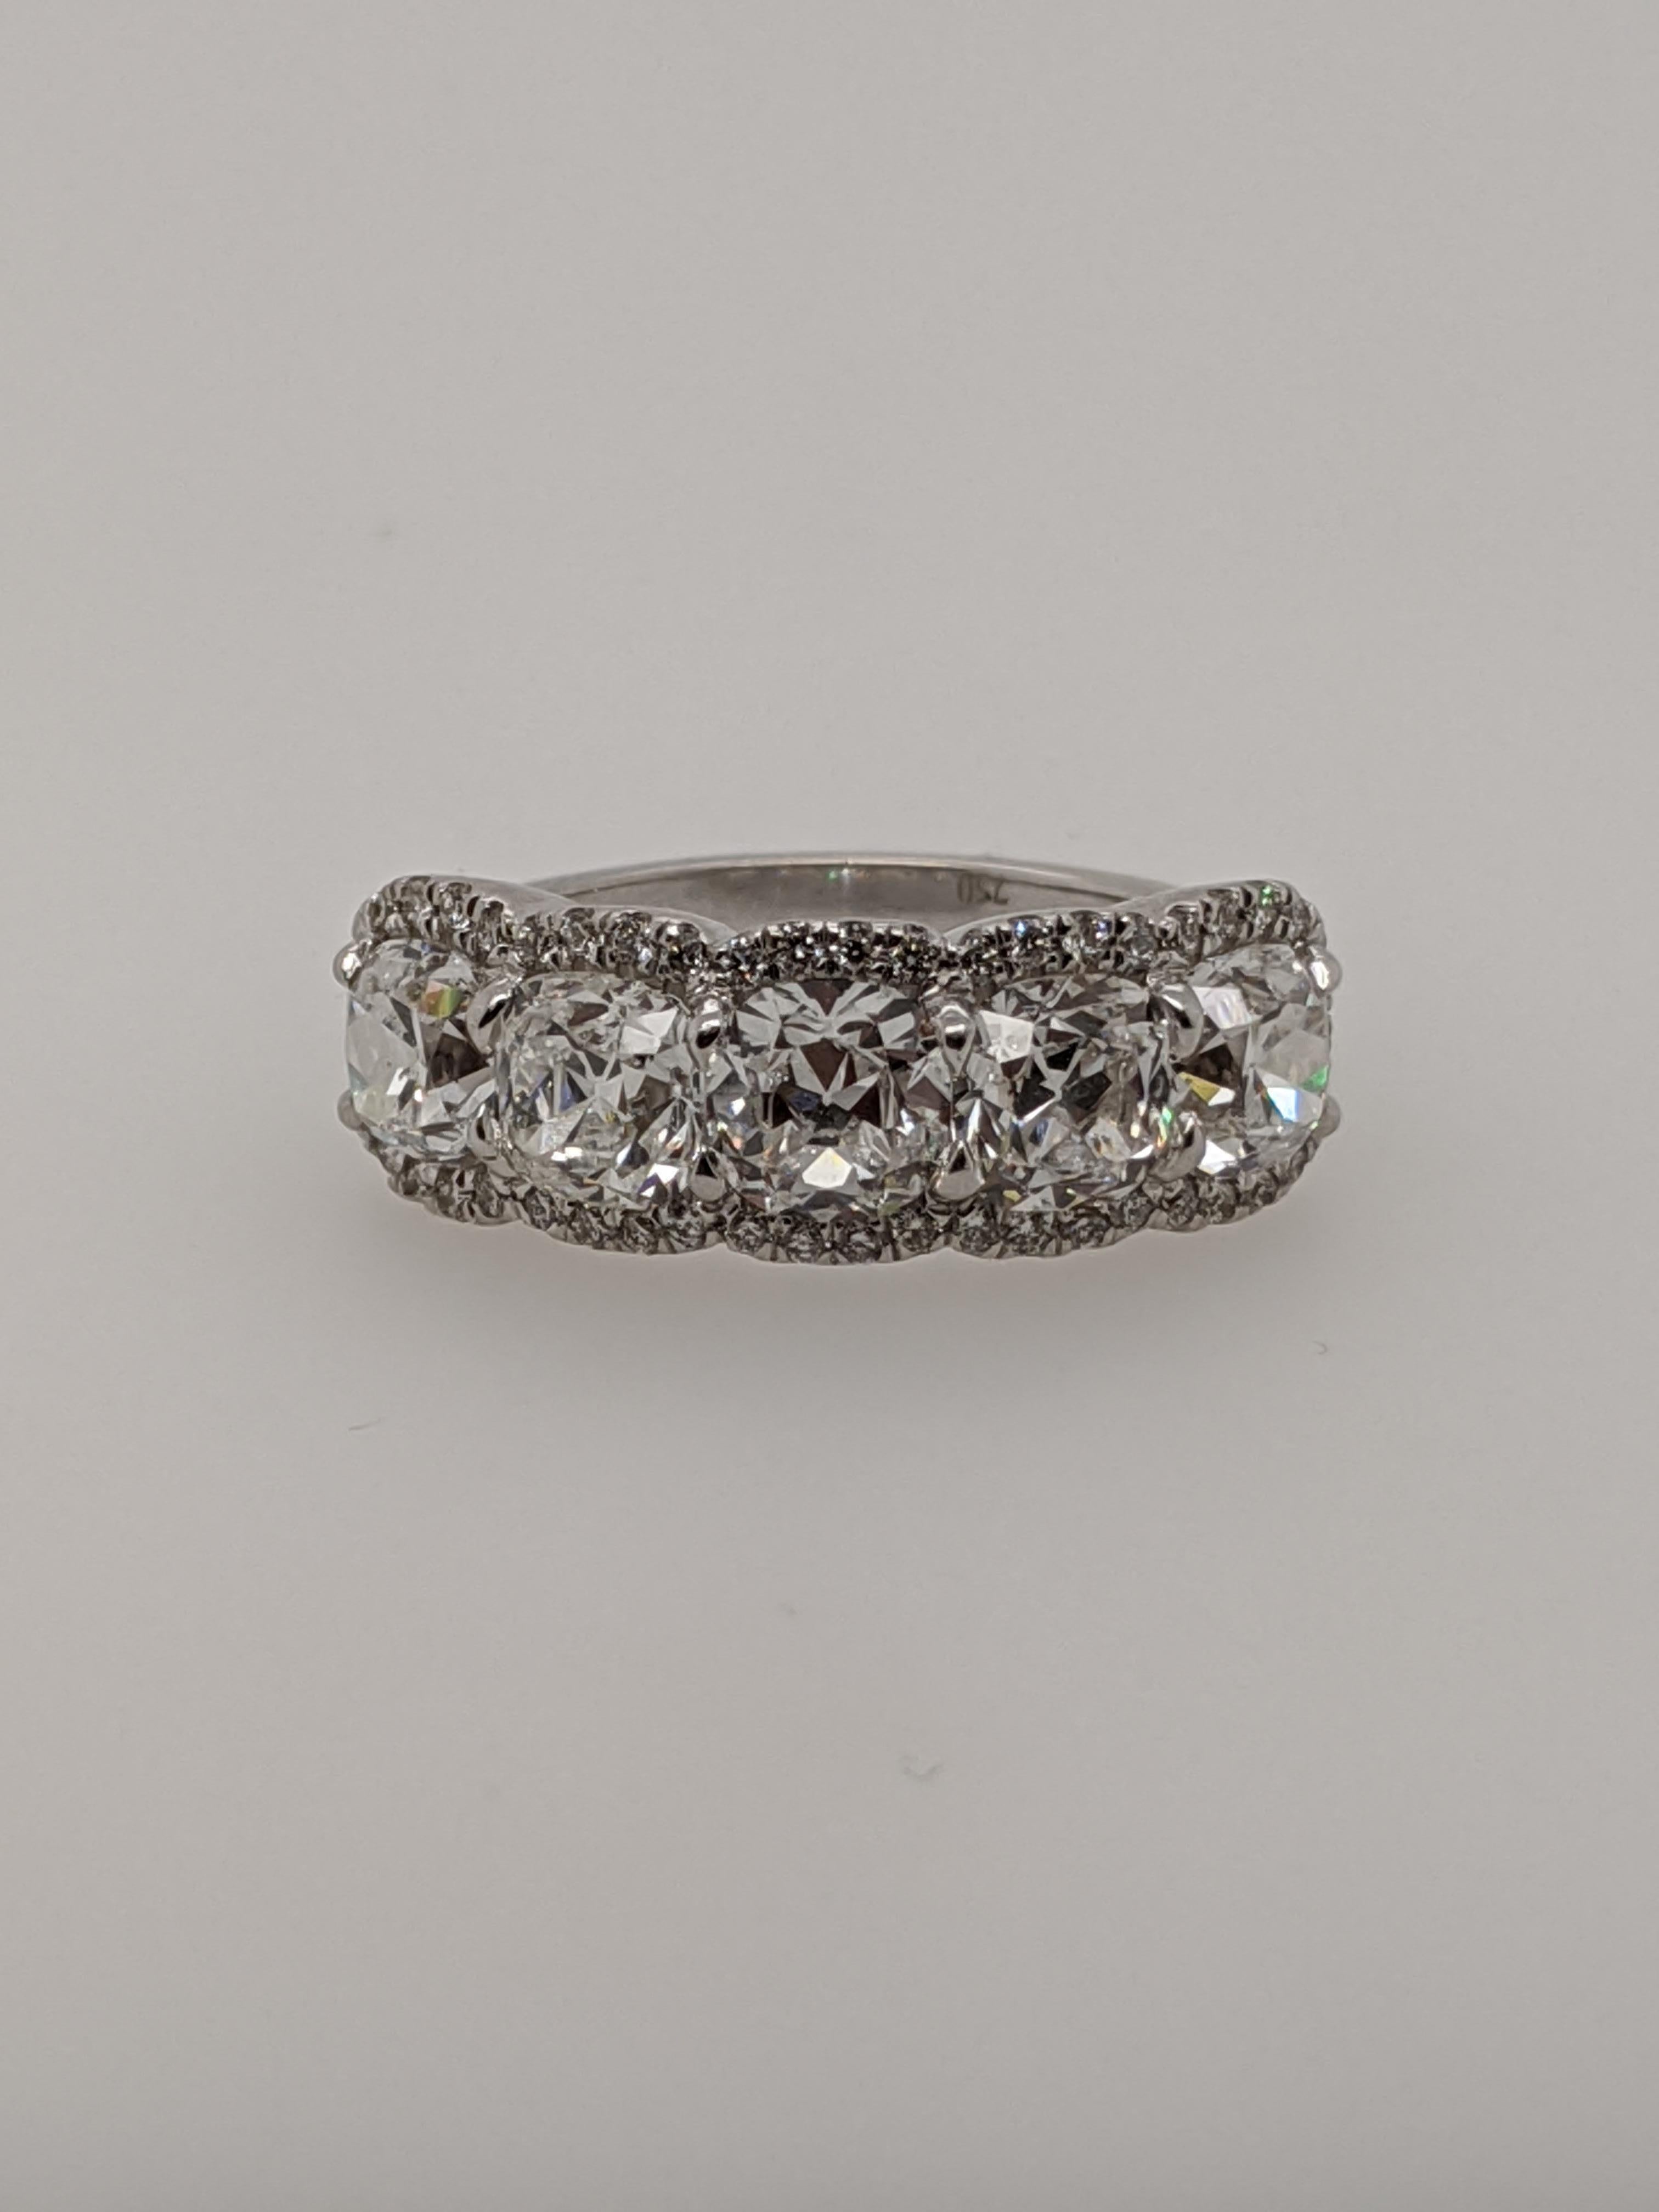 Exquisite diamond ring spanning the top of the finger featuring five cushion cut diamonds (3.31 carat total)  in 18 karat white gold with 46 smaller diamonds as accents on the outside.   We call this ring 